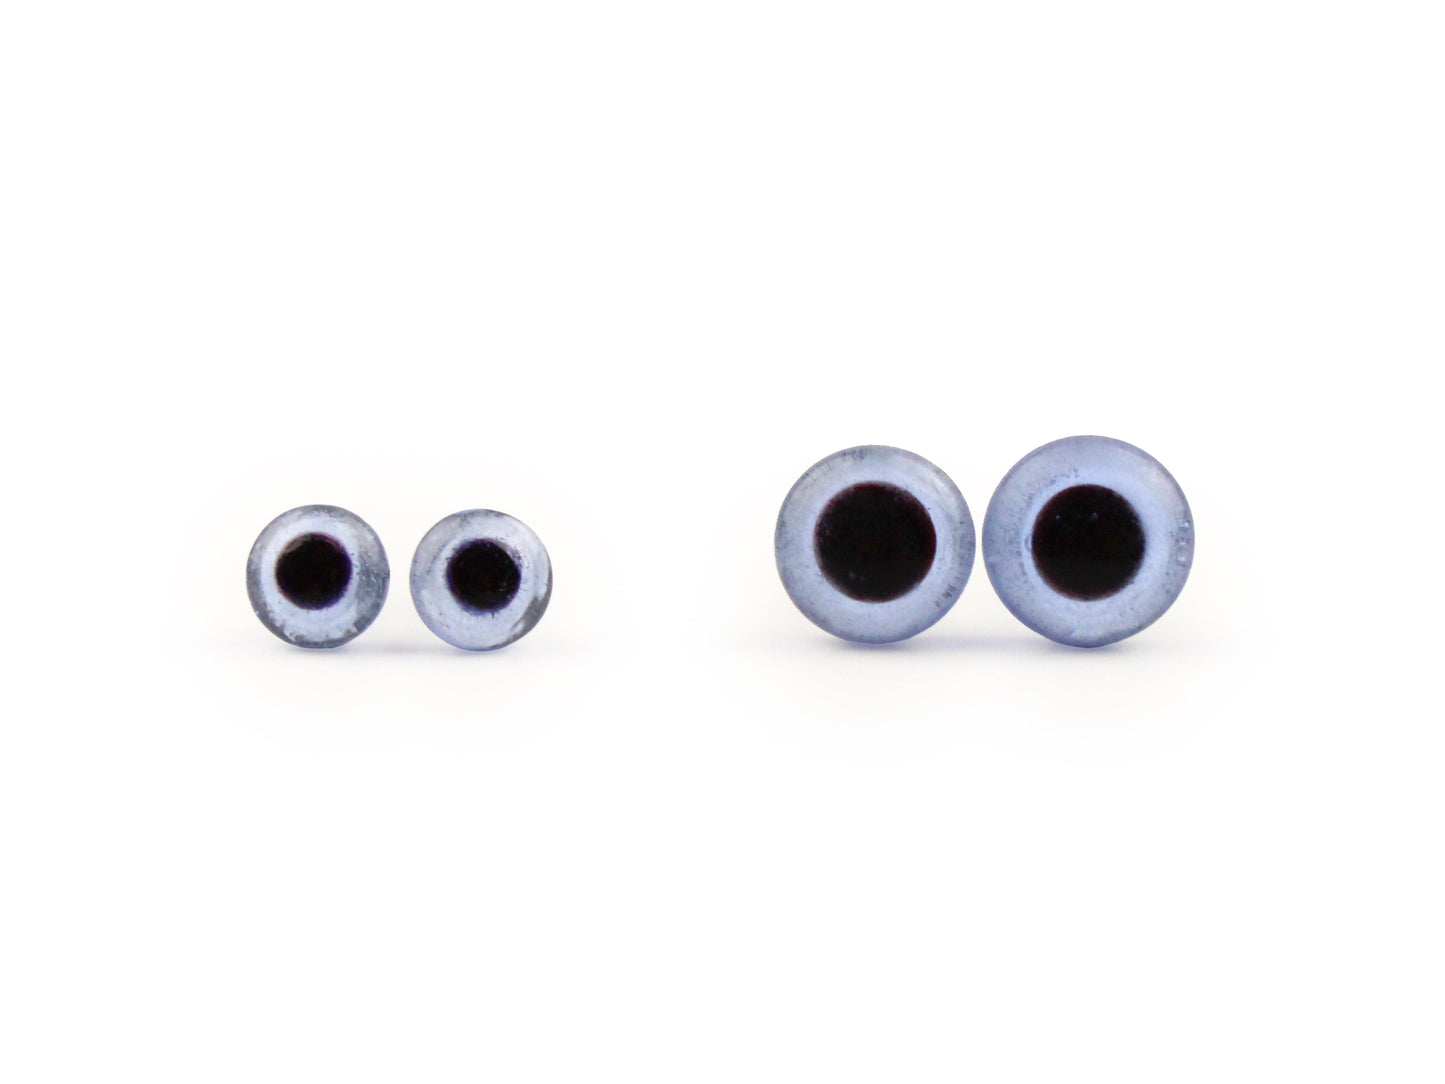 Blue Easy glue-in glass eyes - 3-7 mm options - The Makerss